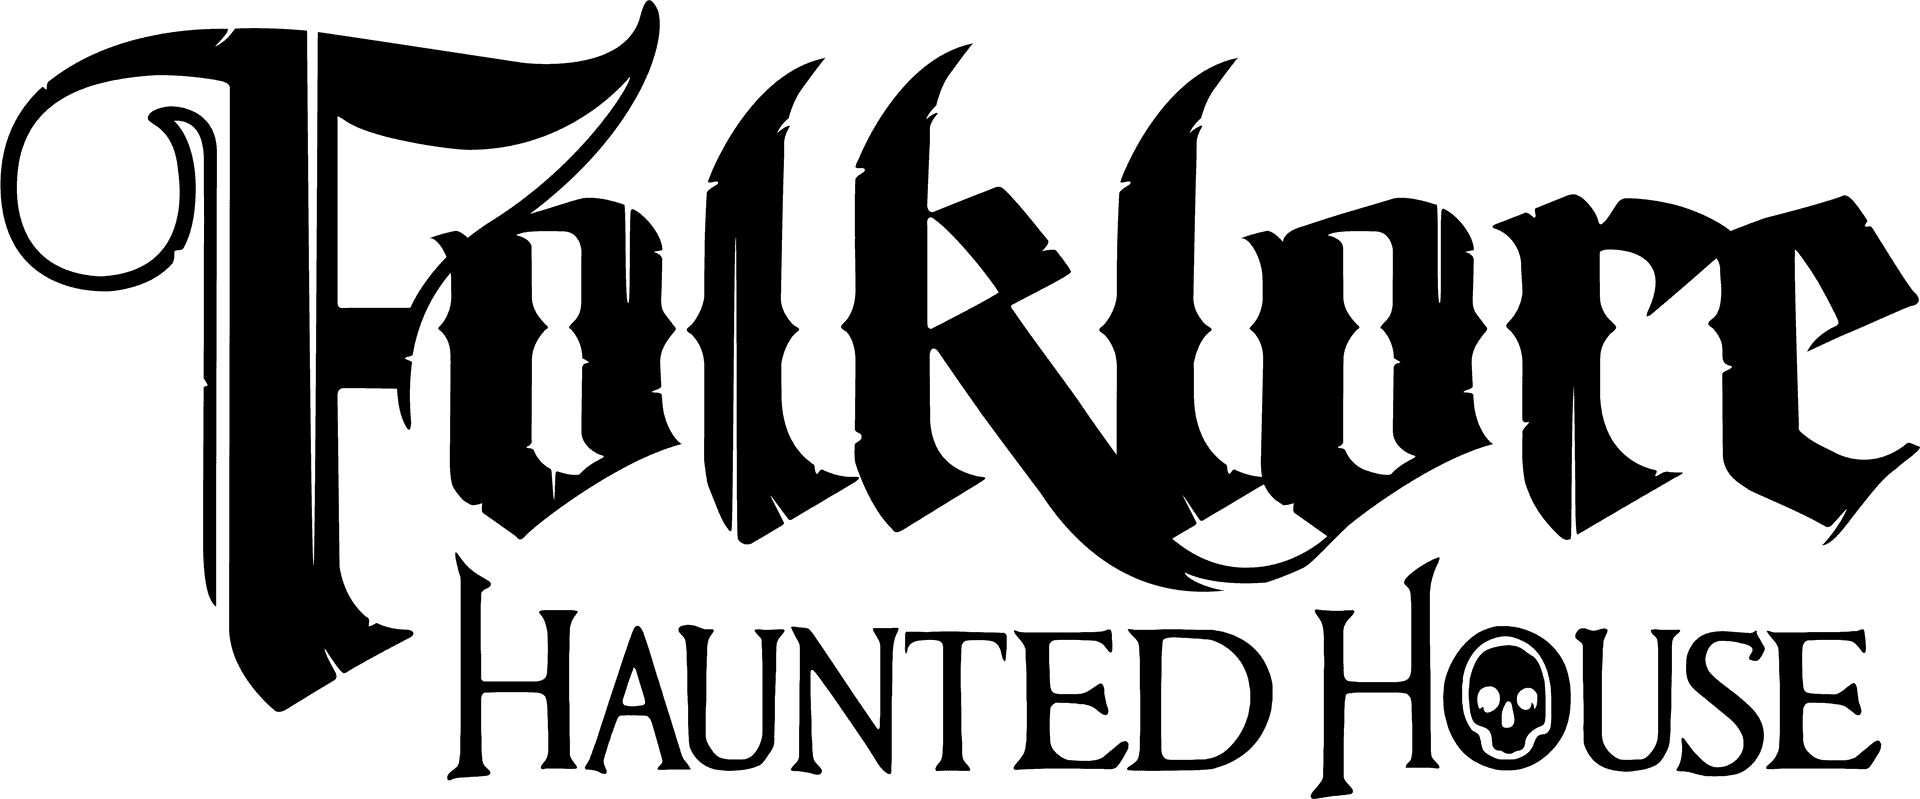 Folklore Haunted House Logo PNG